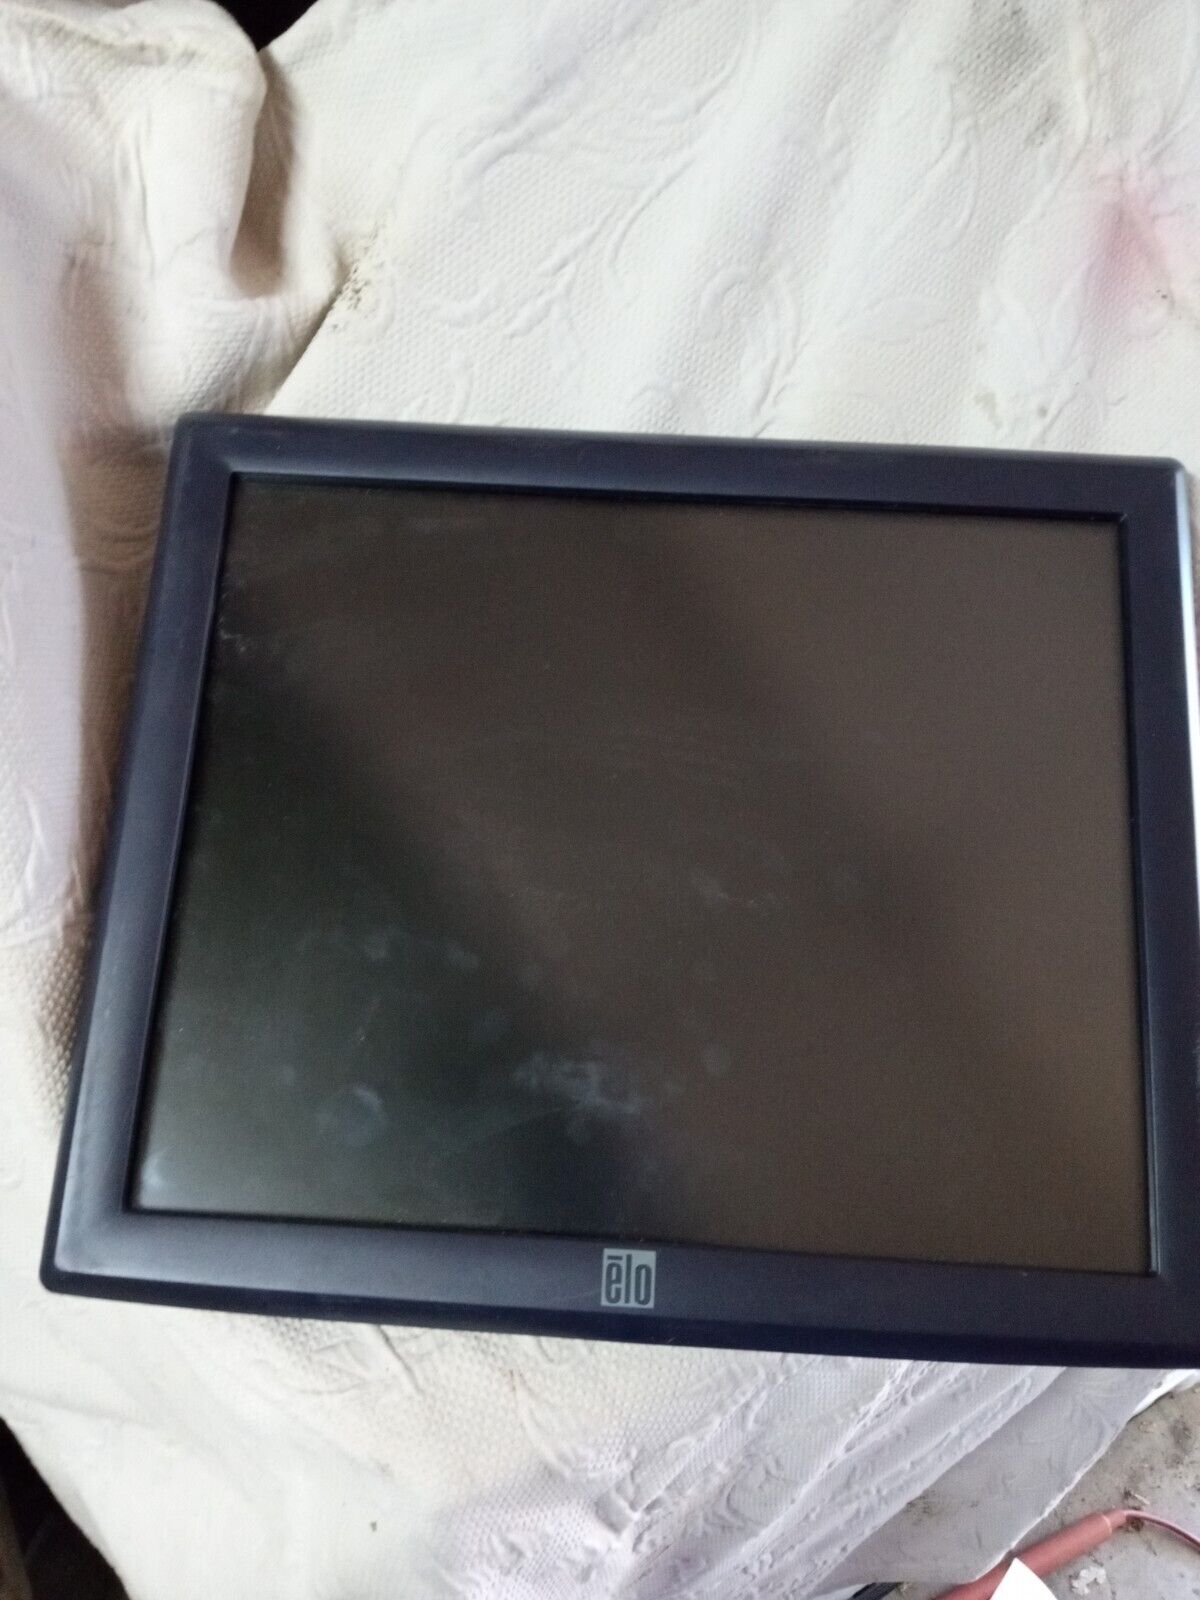 TYCO ELECTRONICS ET1715L-8CWB-1-GY-G ELO TOUCH SYSTEMS SCREEN 3719160